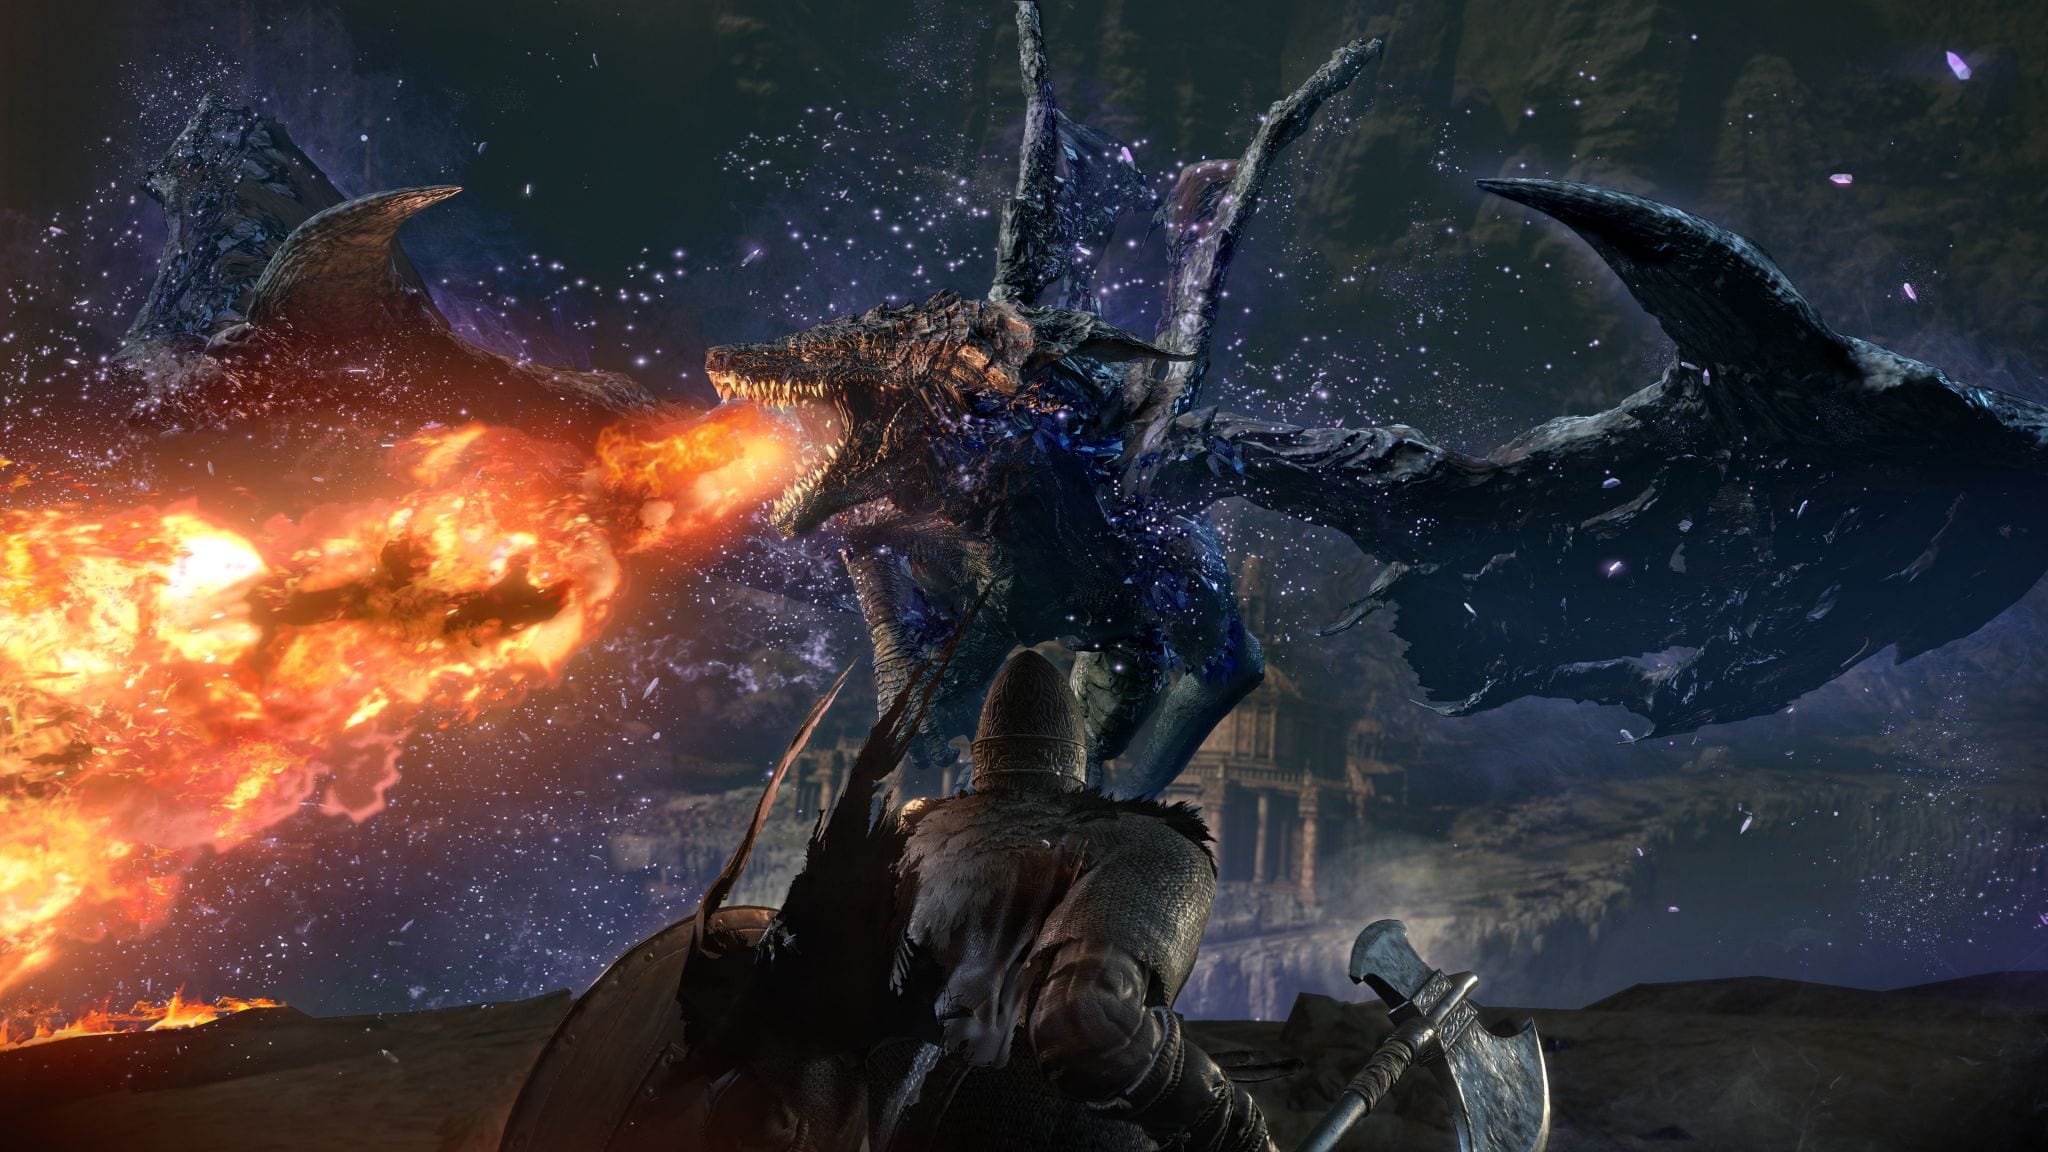 Dark Souls 3 Ringed City DLC images are very spoilery